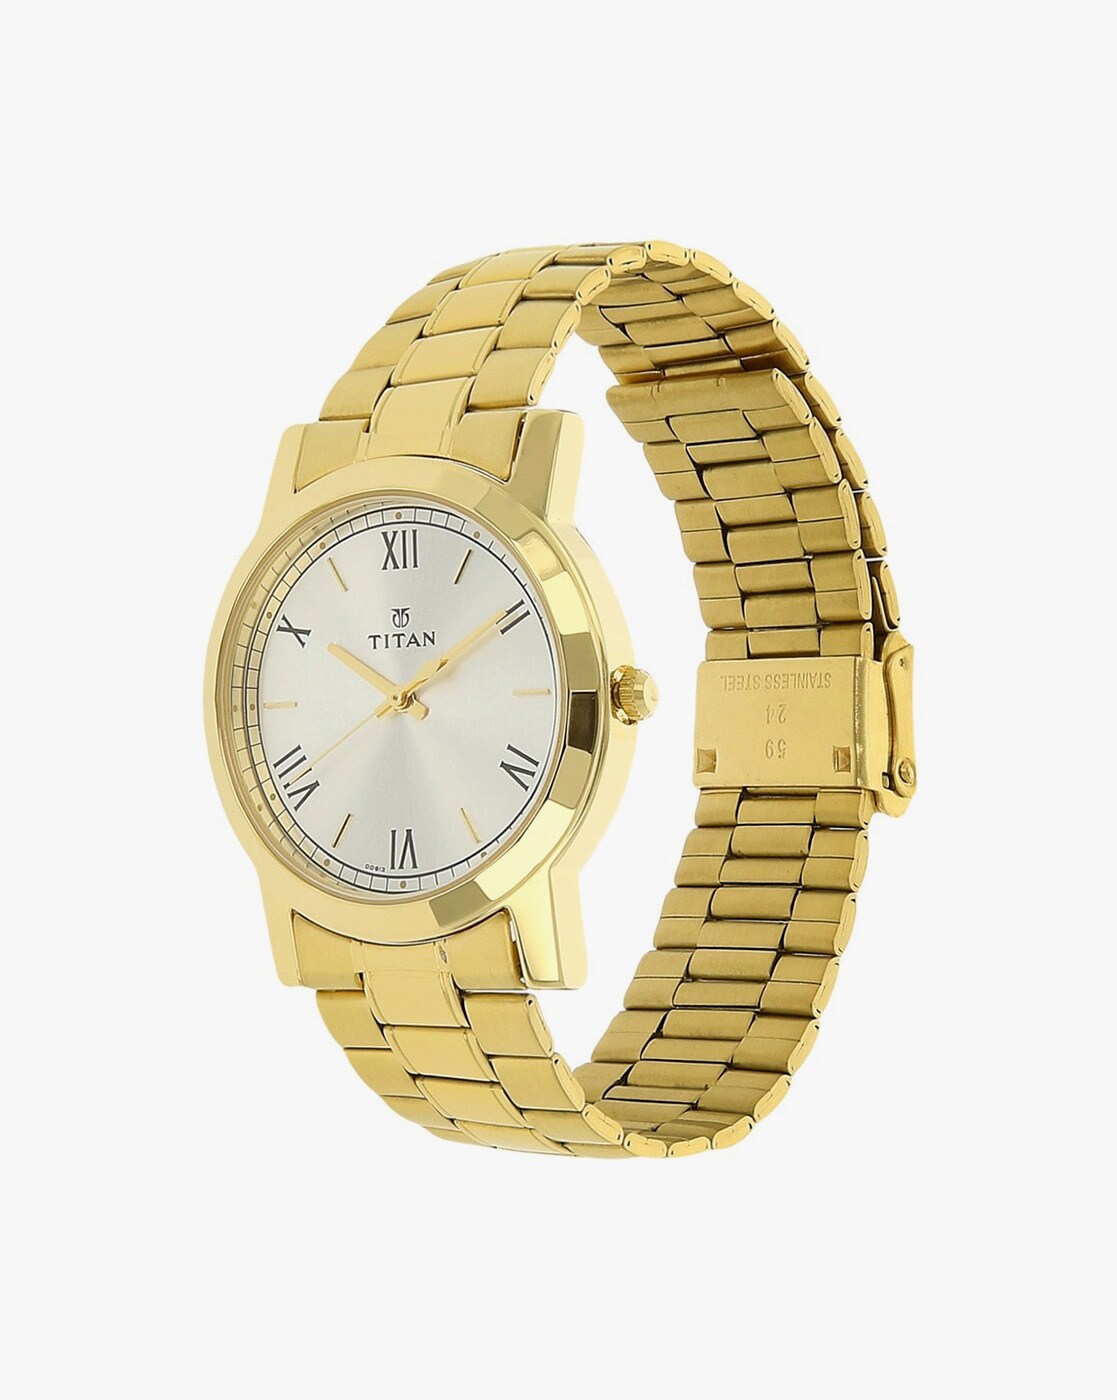 Buy ROYAL LOOK For Men s Wrist Watch 1187 Online @ ₹950 from ShopClues